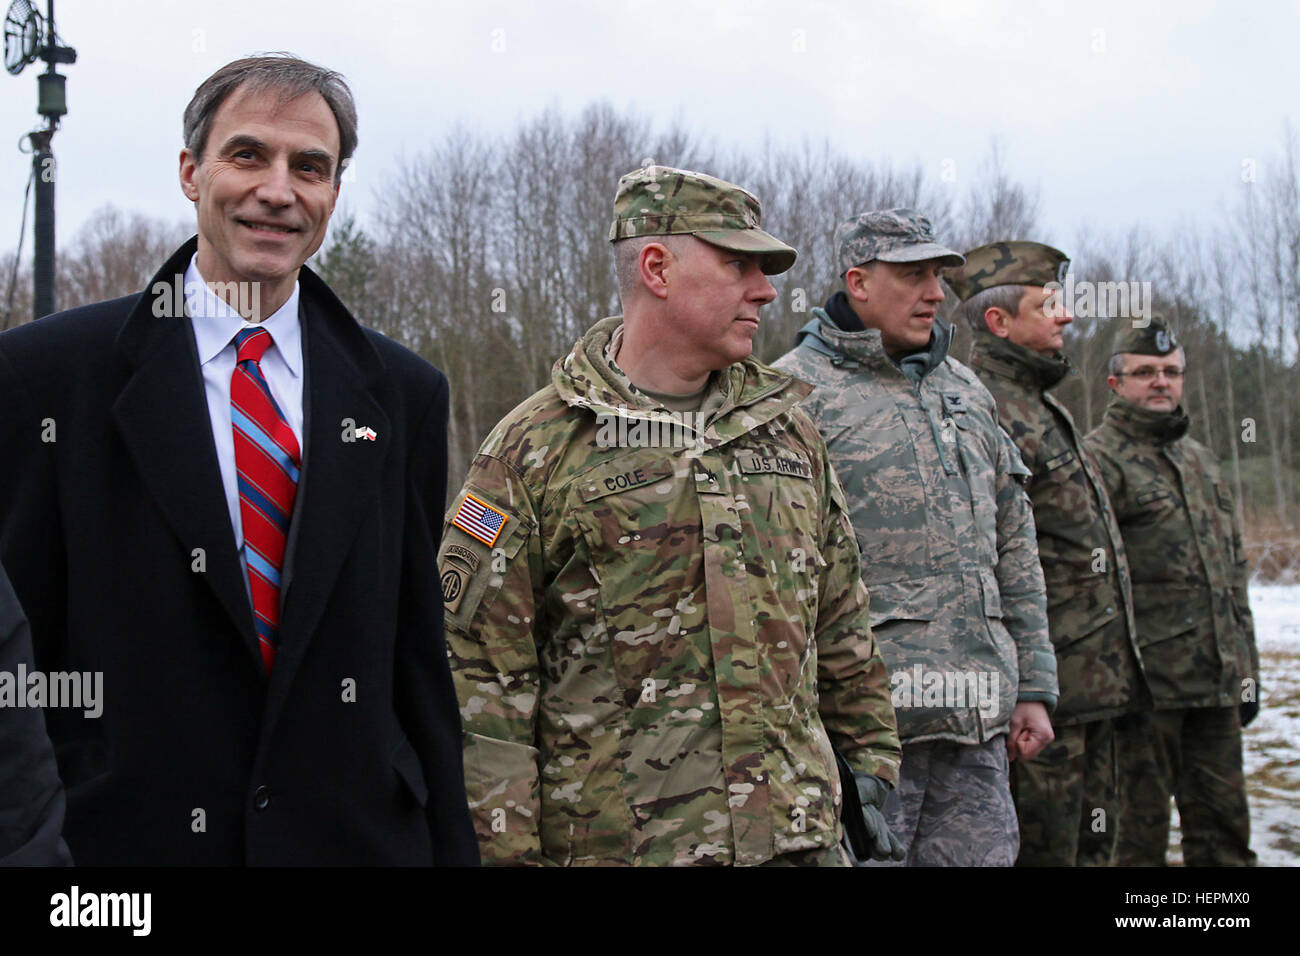 Paul Jones (far left), U.S. ambassador to Poland, and Brig. Gen. William Cole (second from left), deputy commanding general of Research, Development and Engineering Command and commander of the U.S. Army Natick Soldier Systems Center, stand together during a meet and greet during Panther Assurance, an interoperability deployment readiness exercise, Jan. 16, at Skwierzyna, Poland. Jones and Cole visited 5-7 ADA’s training site along with Antoni Macierewicz, Polish minister of defense, to view 5-7 ADA’s M901 Patriot Launching Stations. Panther Assurance builds fires interoperability between the  Stock Photo